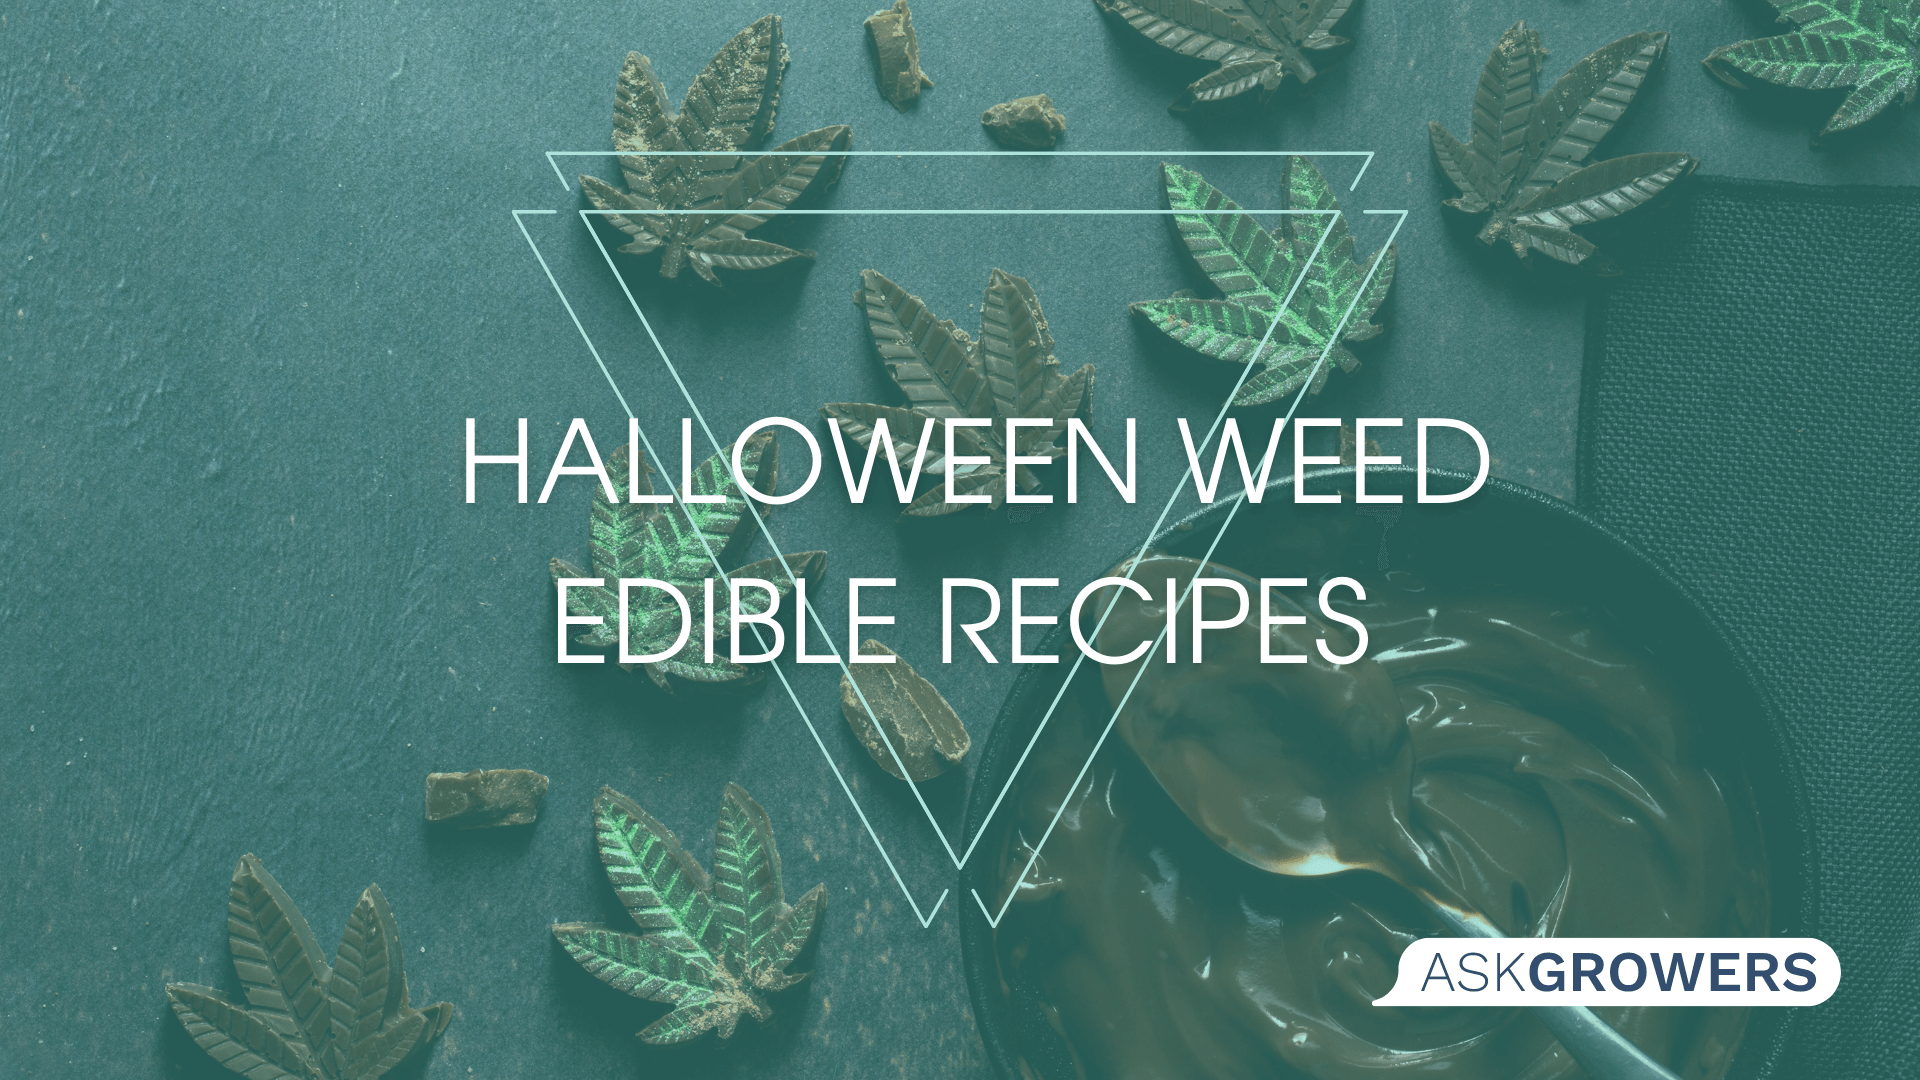 7 Best Halloween Weed Edible Recipes for Your Party